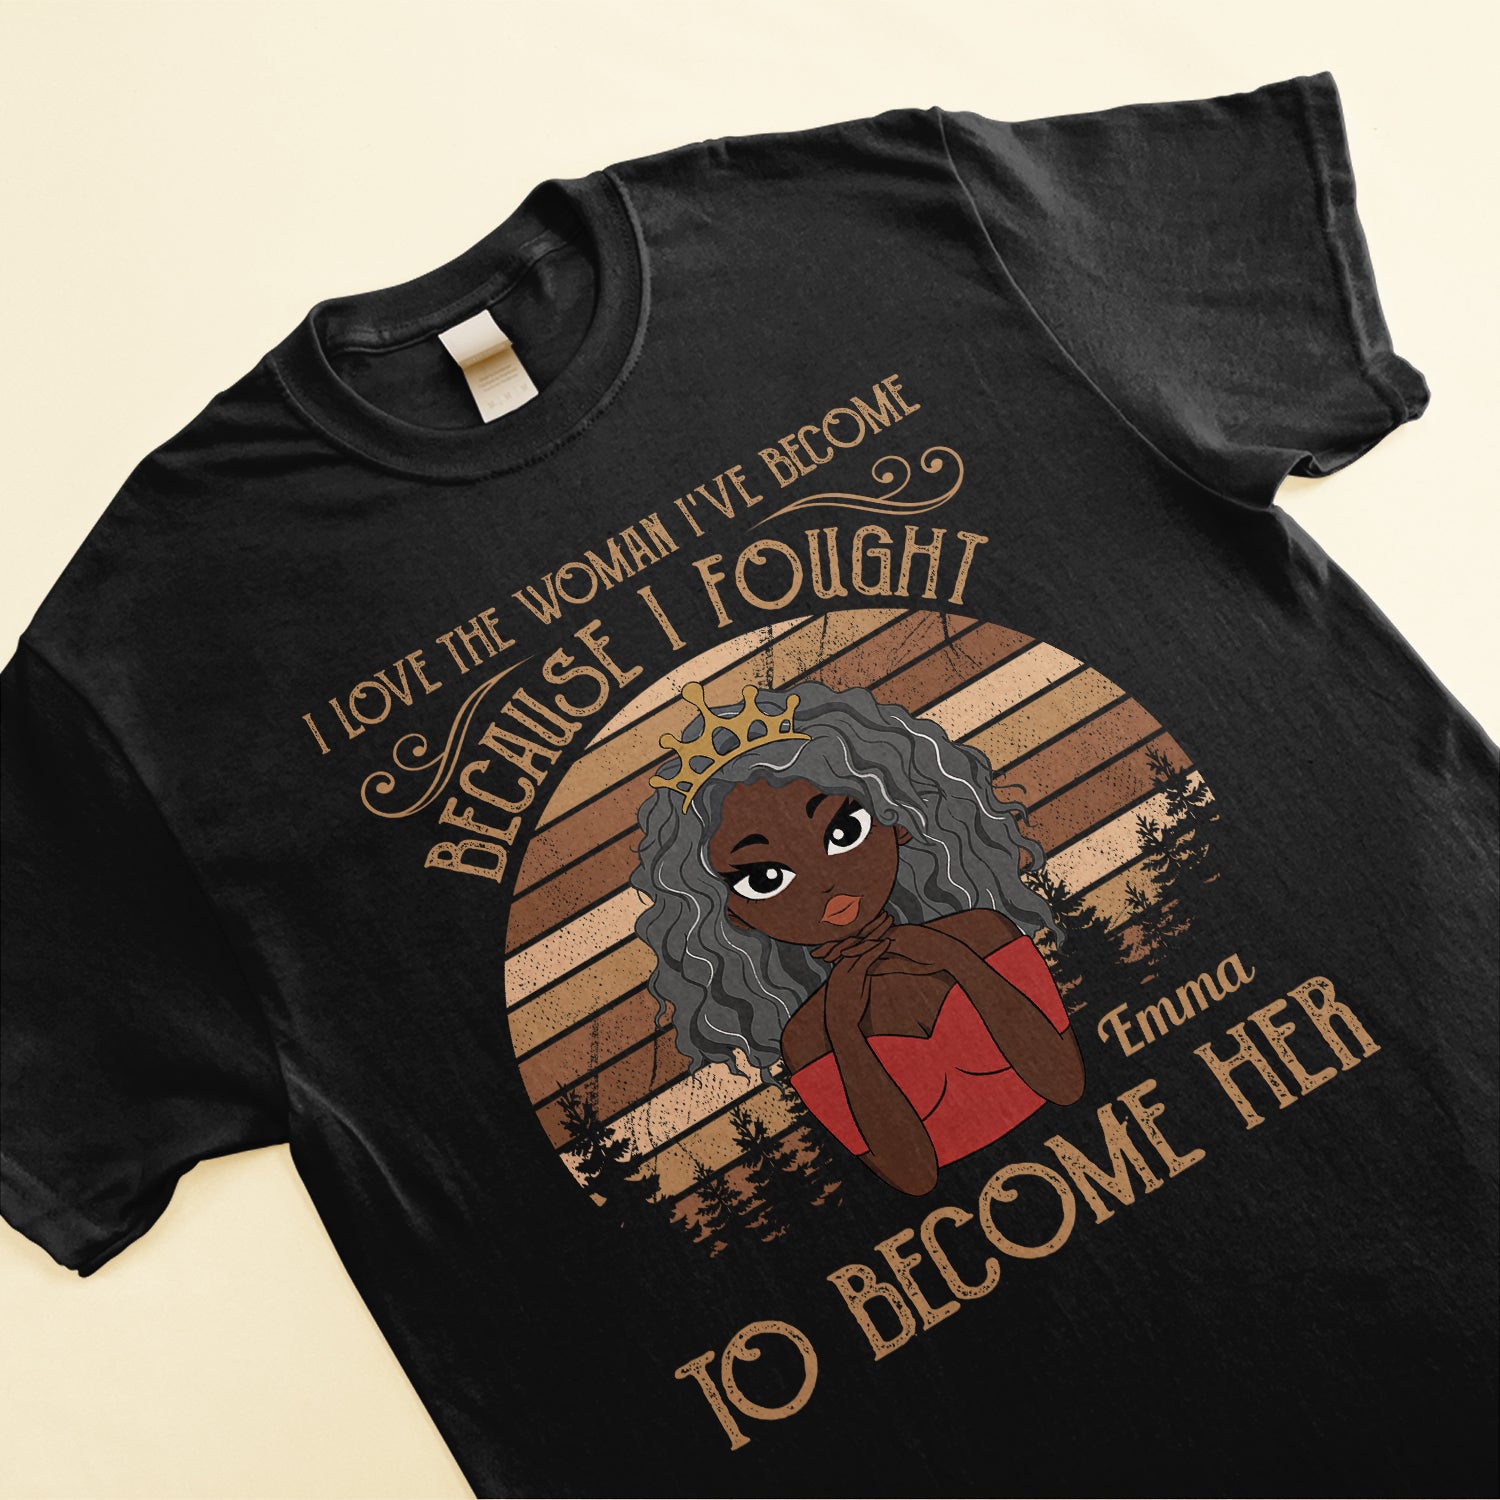 I Fought To Become Her - Personalized Shirt - Birthday Gift For Black Woman, Black Girl